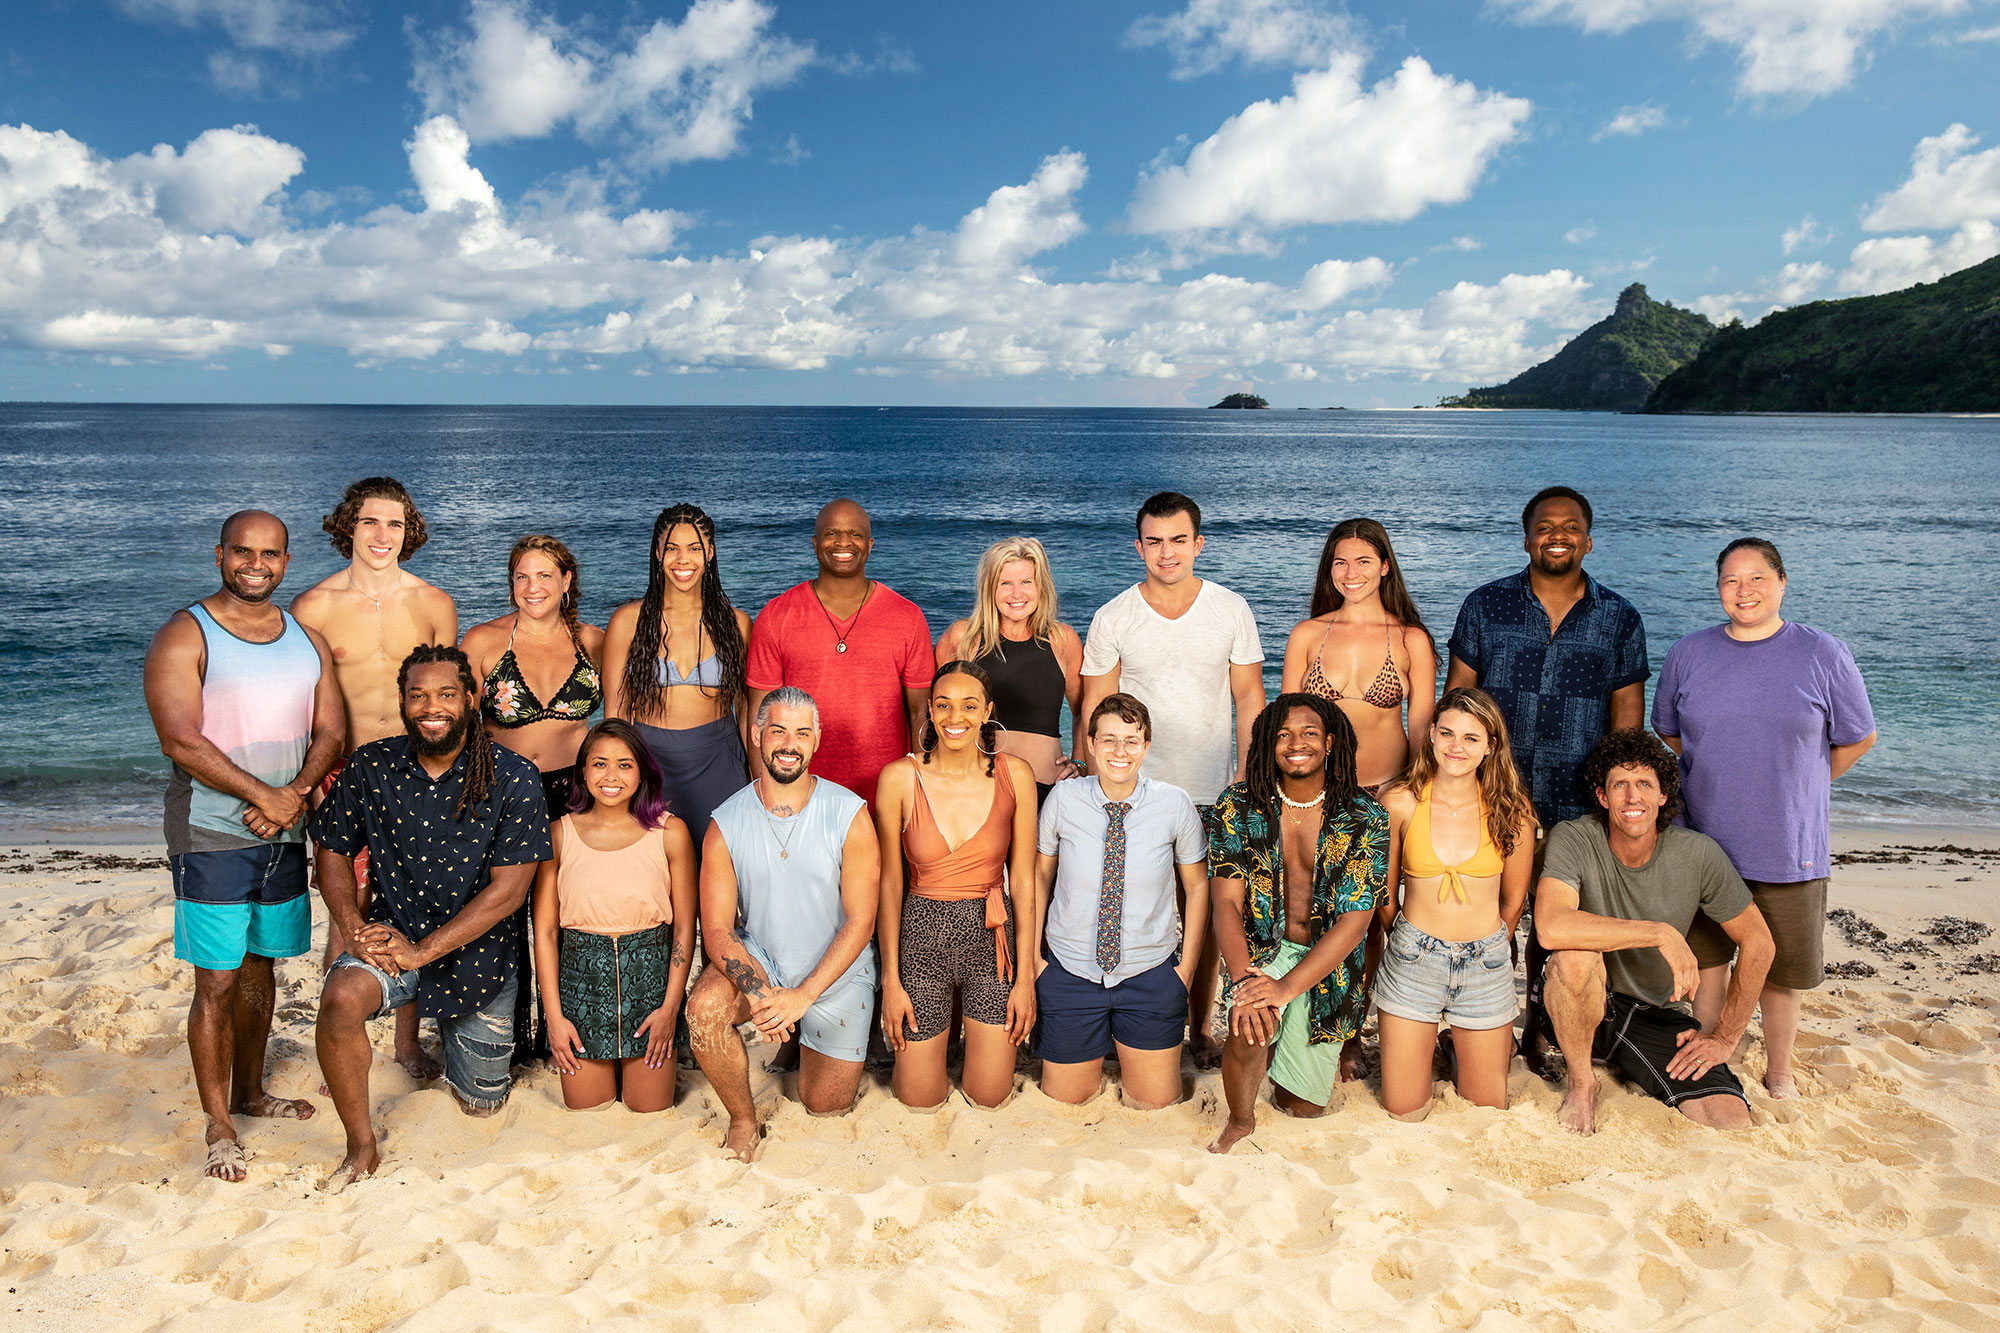 Survivor: These are the contestants of the show that have passed away